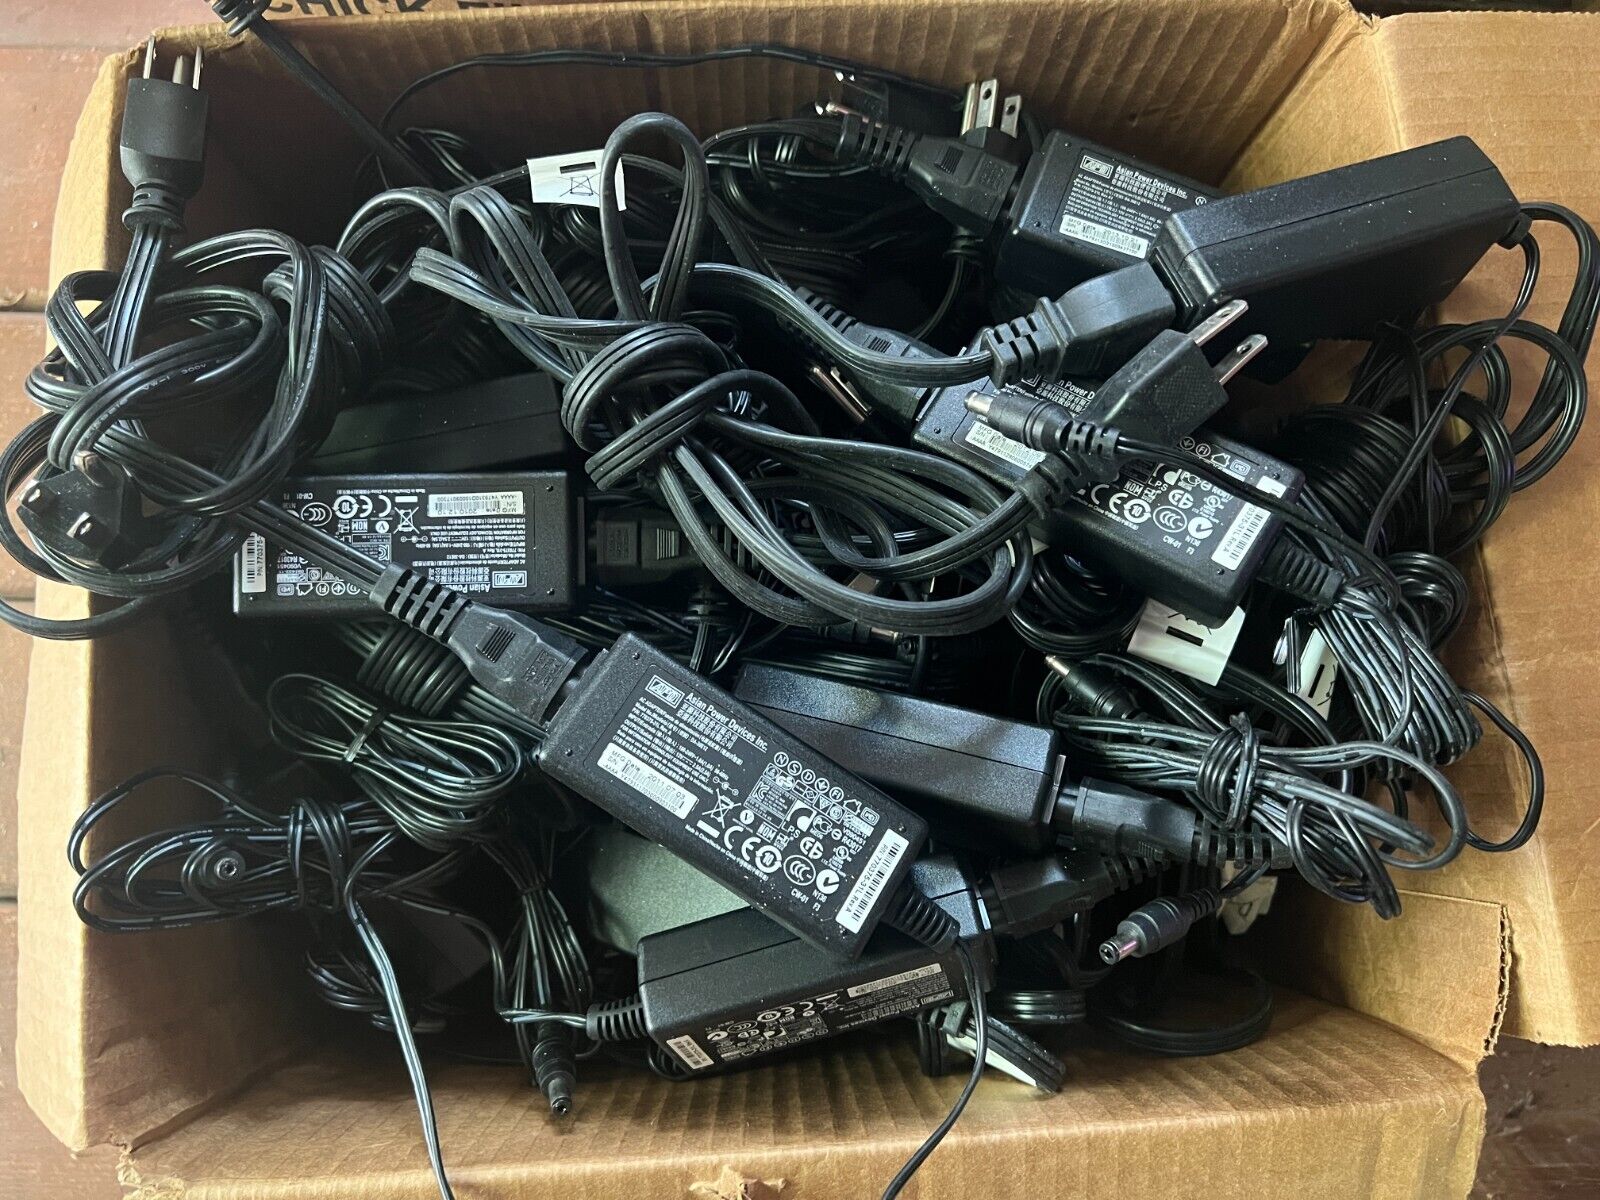 Lot of 35 APD Asian Power Devices DA-30E12 AC Adapter Dell Wyse 12V 2.5A